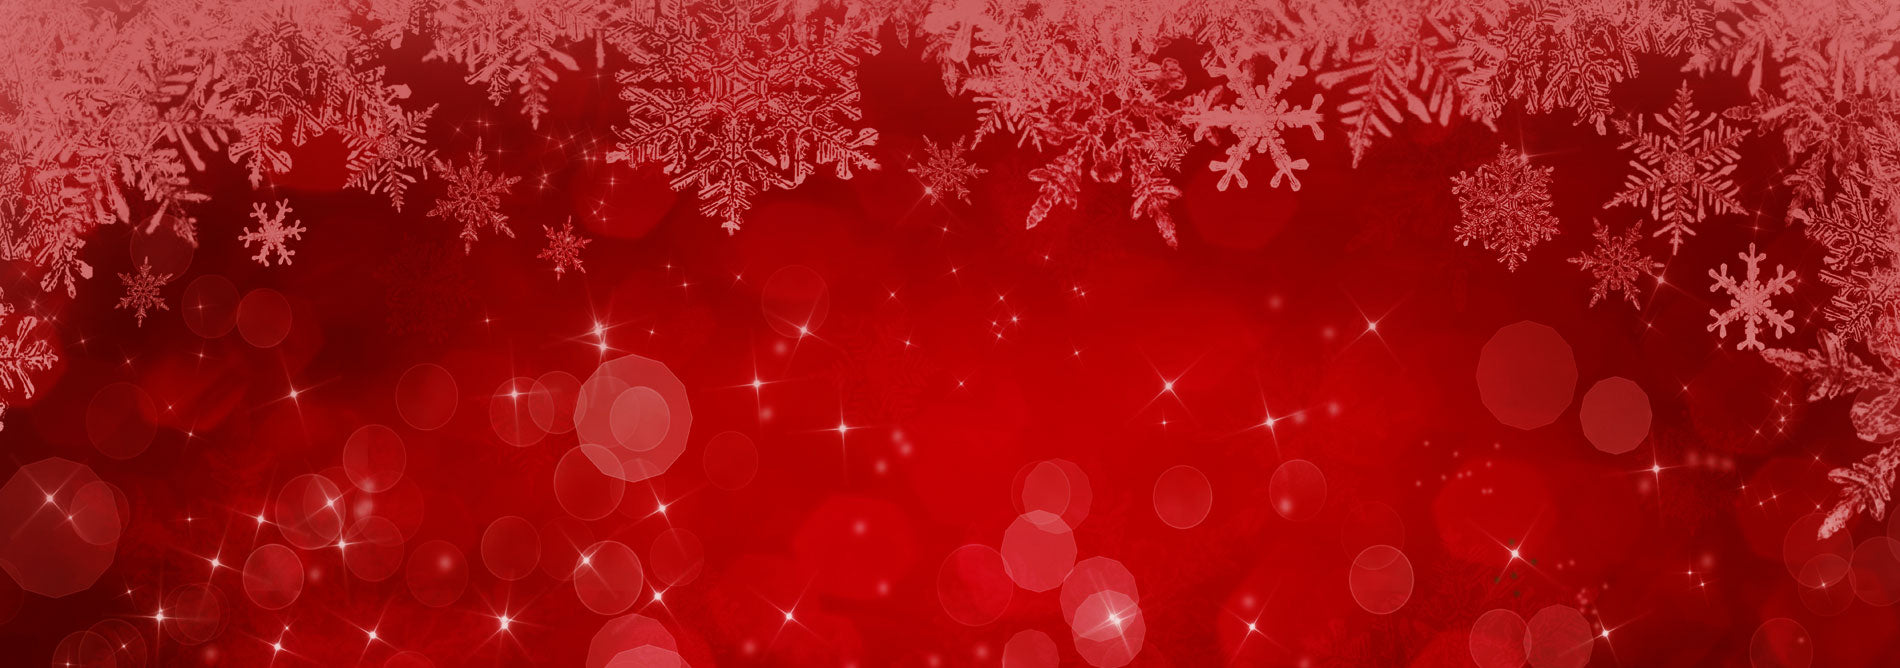 Temp-tations Holiday sparkles background graphic